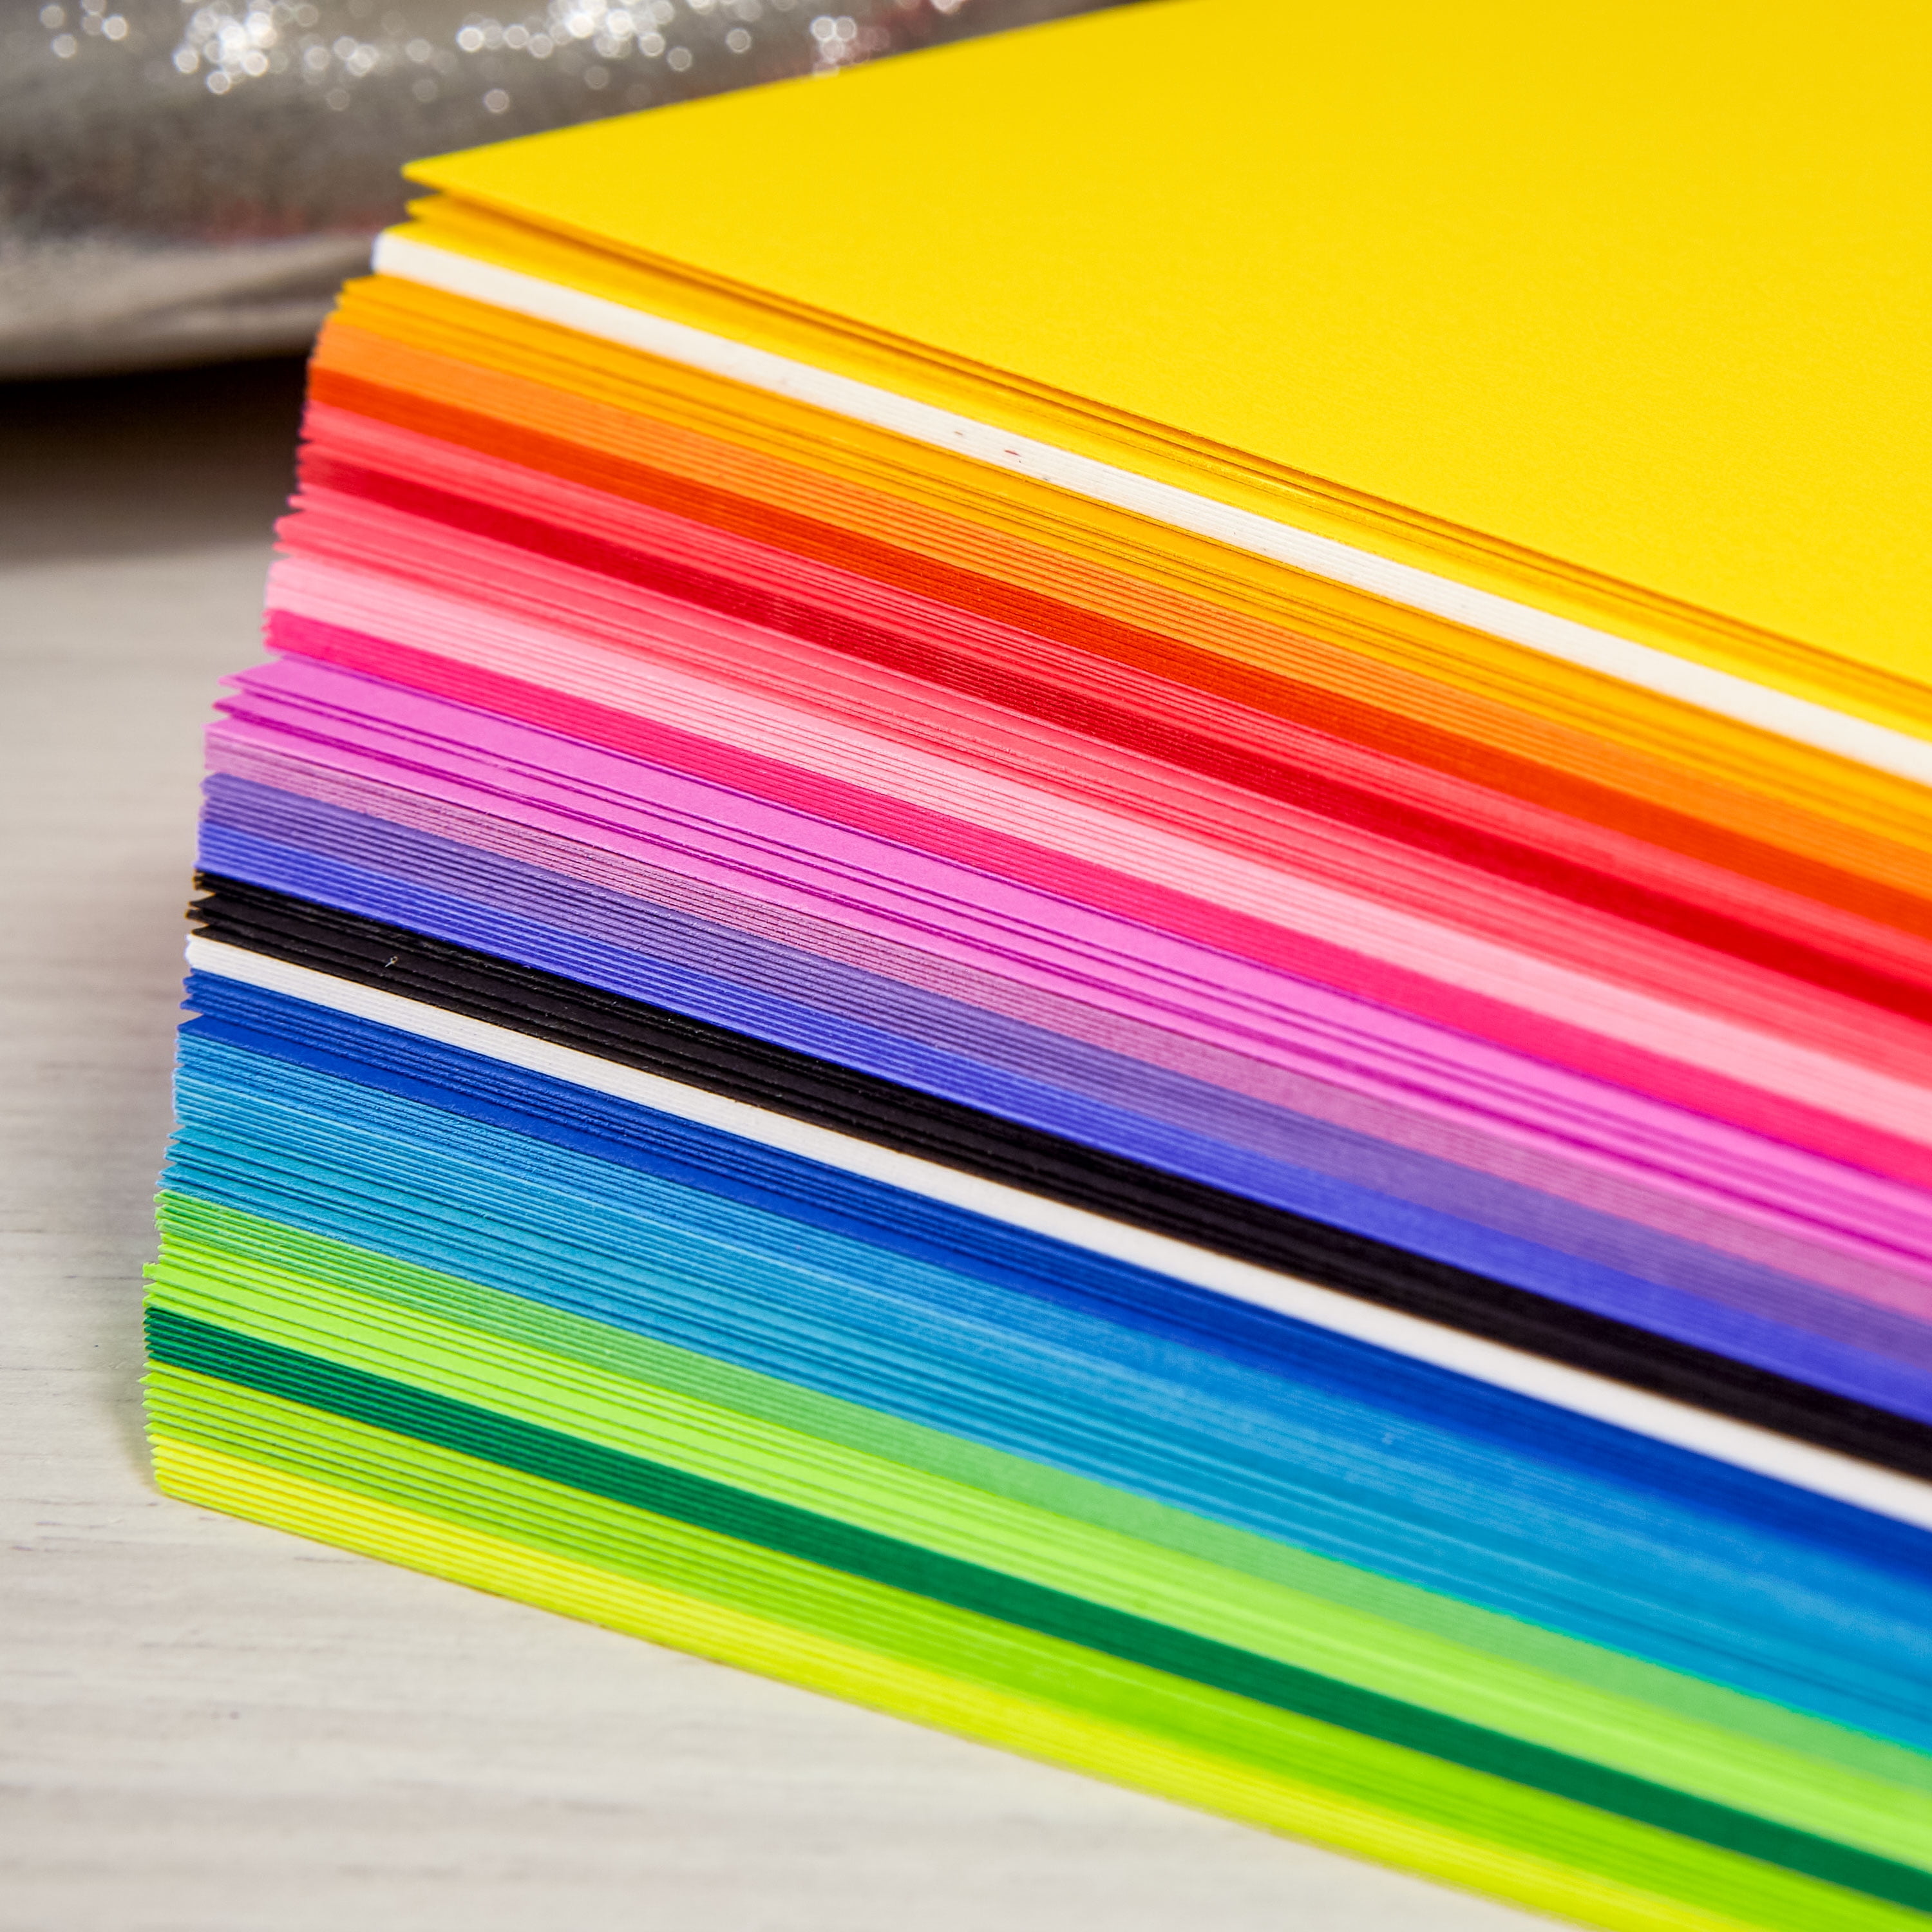 Astrobrights Colored Paper, 24 lbs., 8.5 x 11, Lift-Off Lemon